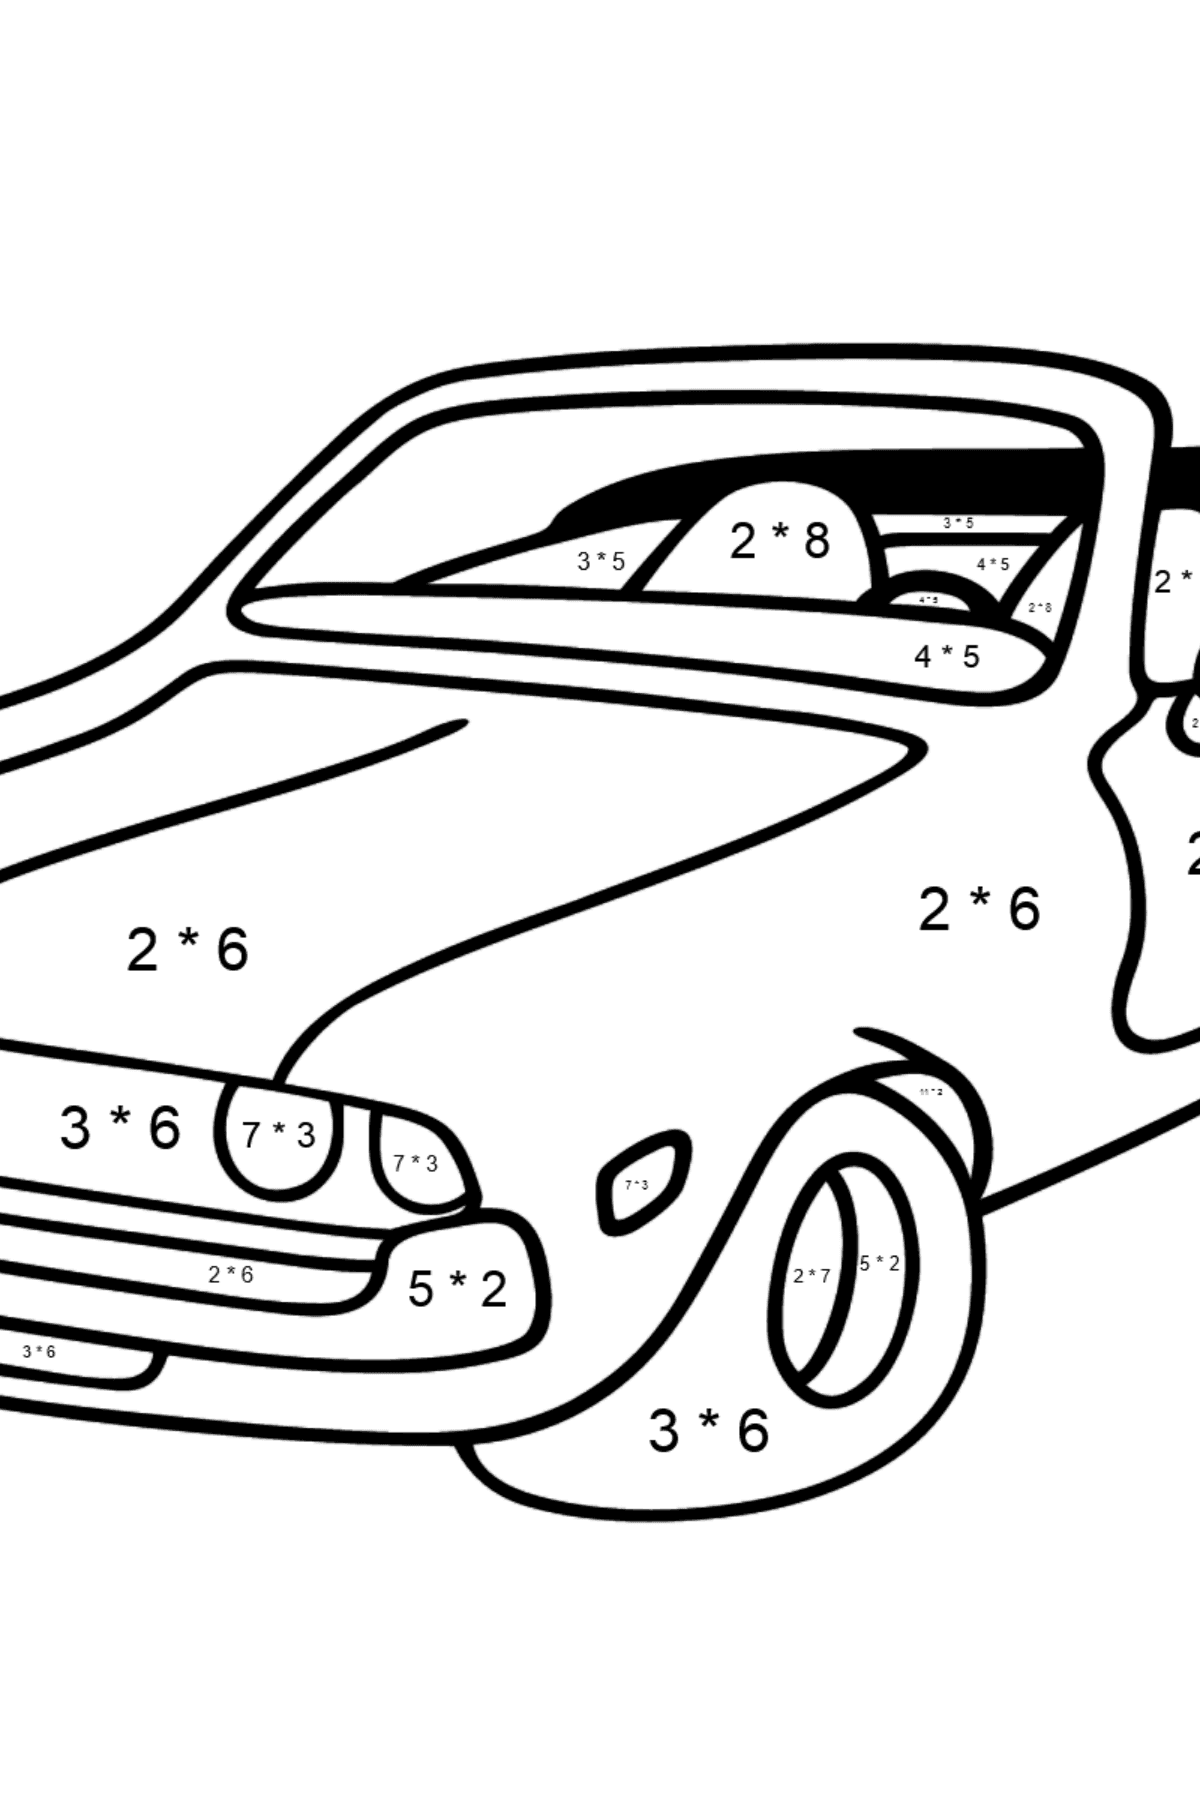 Open Top Cars coloring page - Math Coloring - Multiplication for Kids